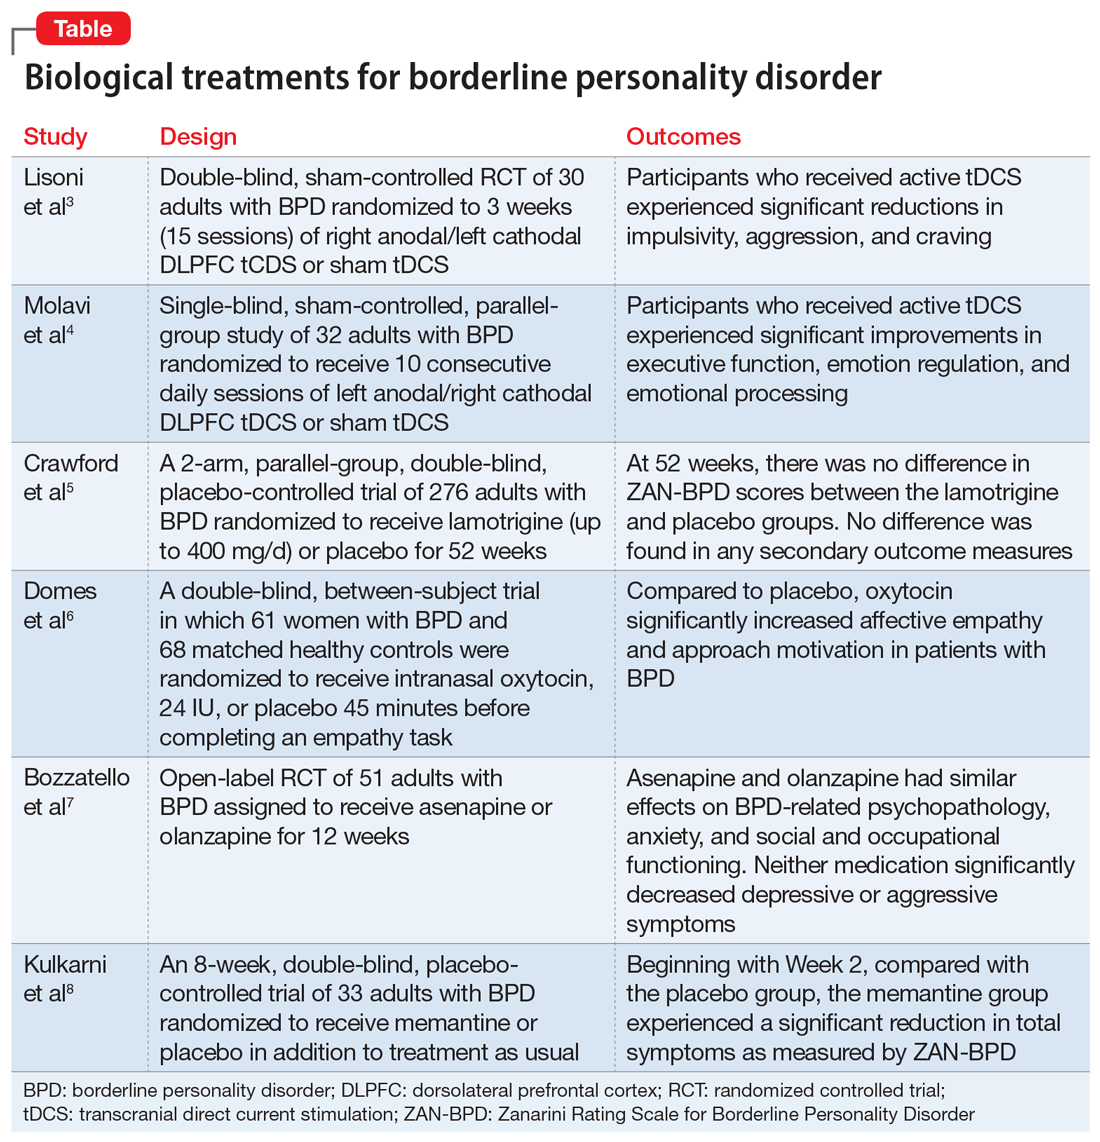 borderline-personality-disorder-6-studies-of-biological-interventions